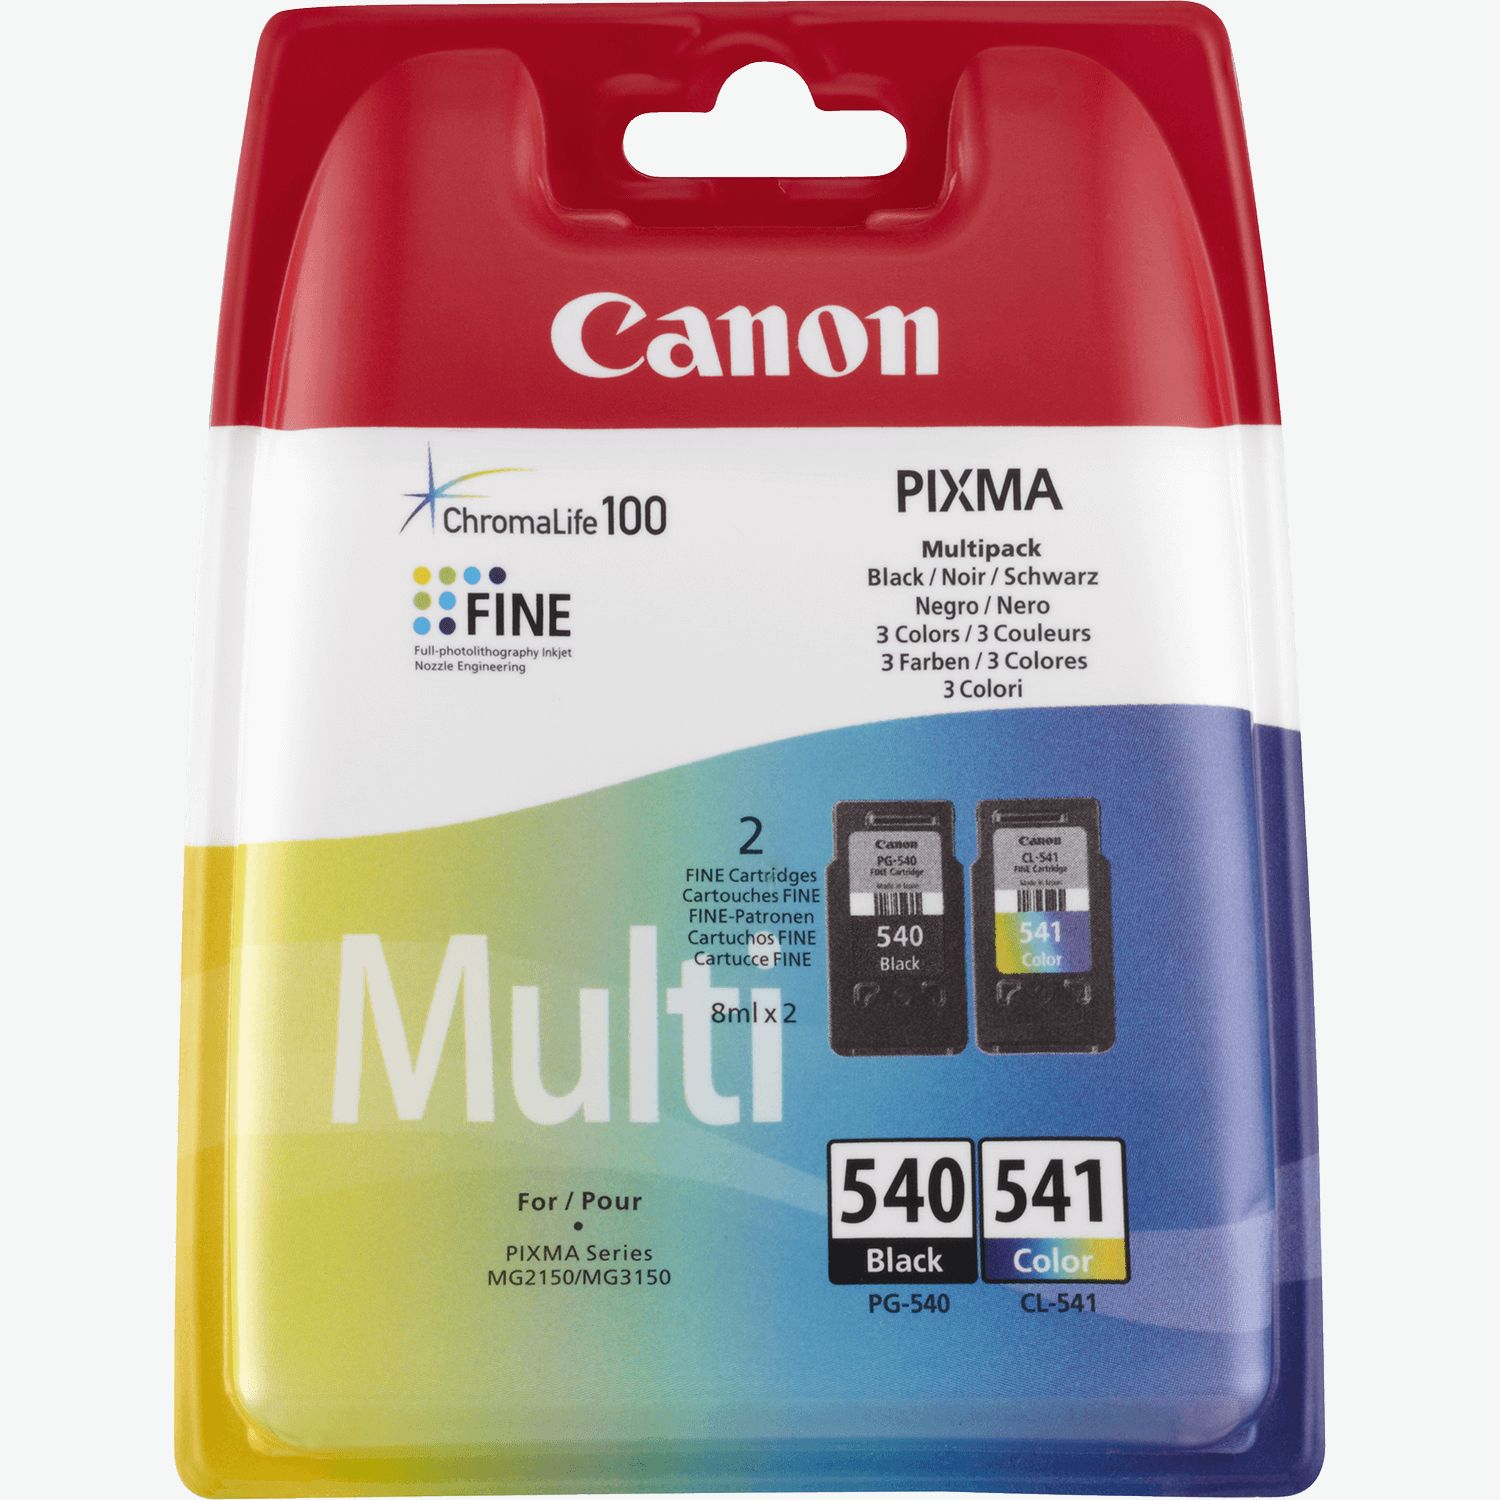 Canon Pixma TS5150 (32 stores) find the best price now »